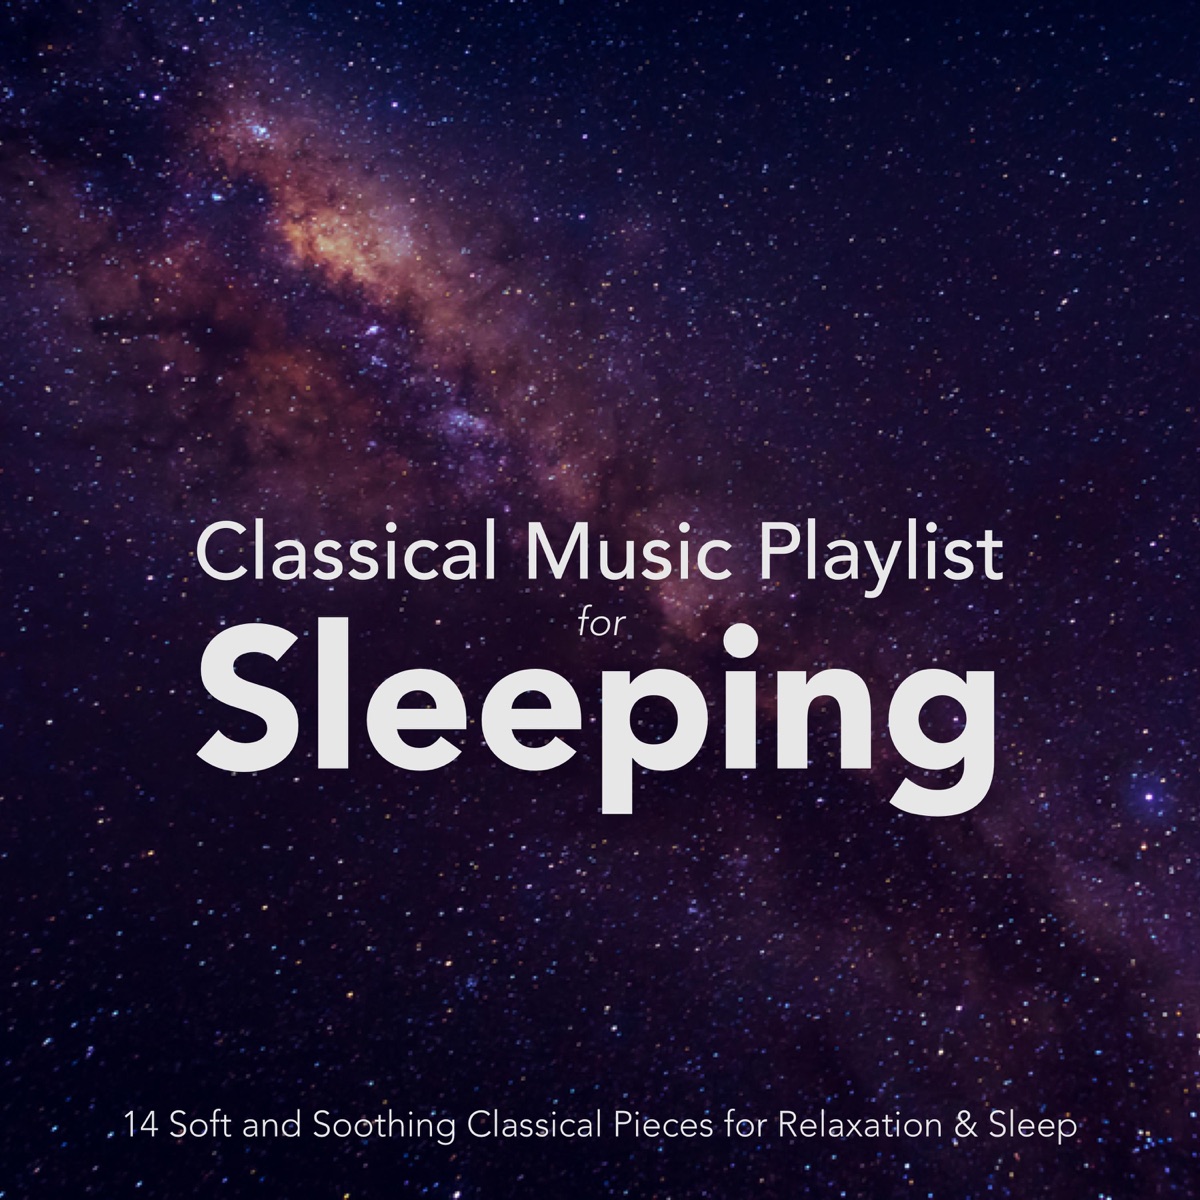 Classical Music Playlist for Sleeping: 14 Soft and Soothing